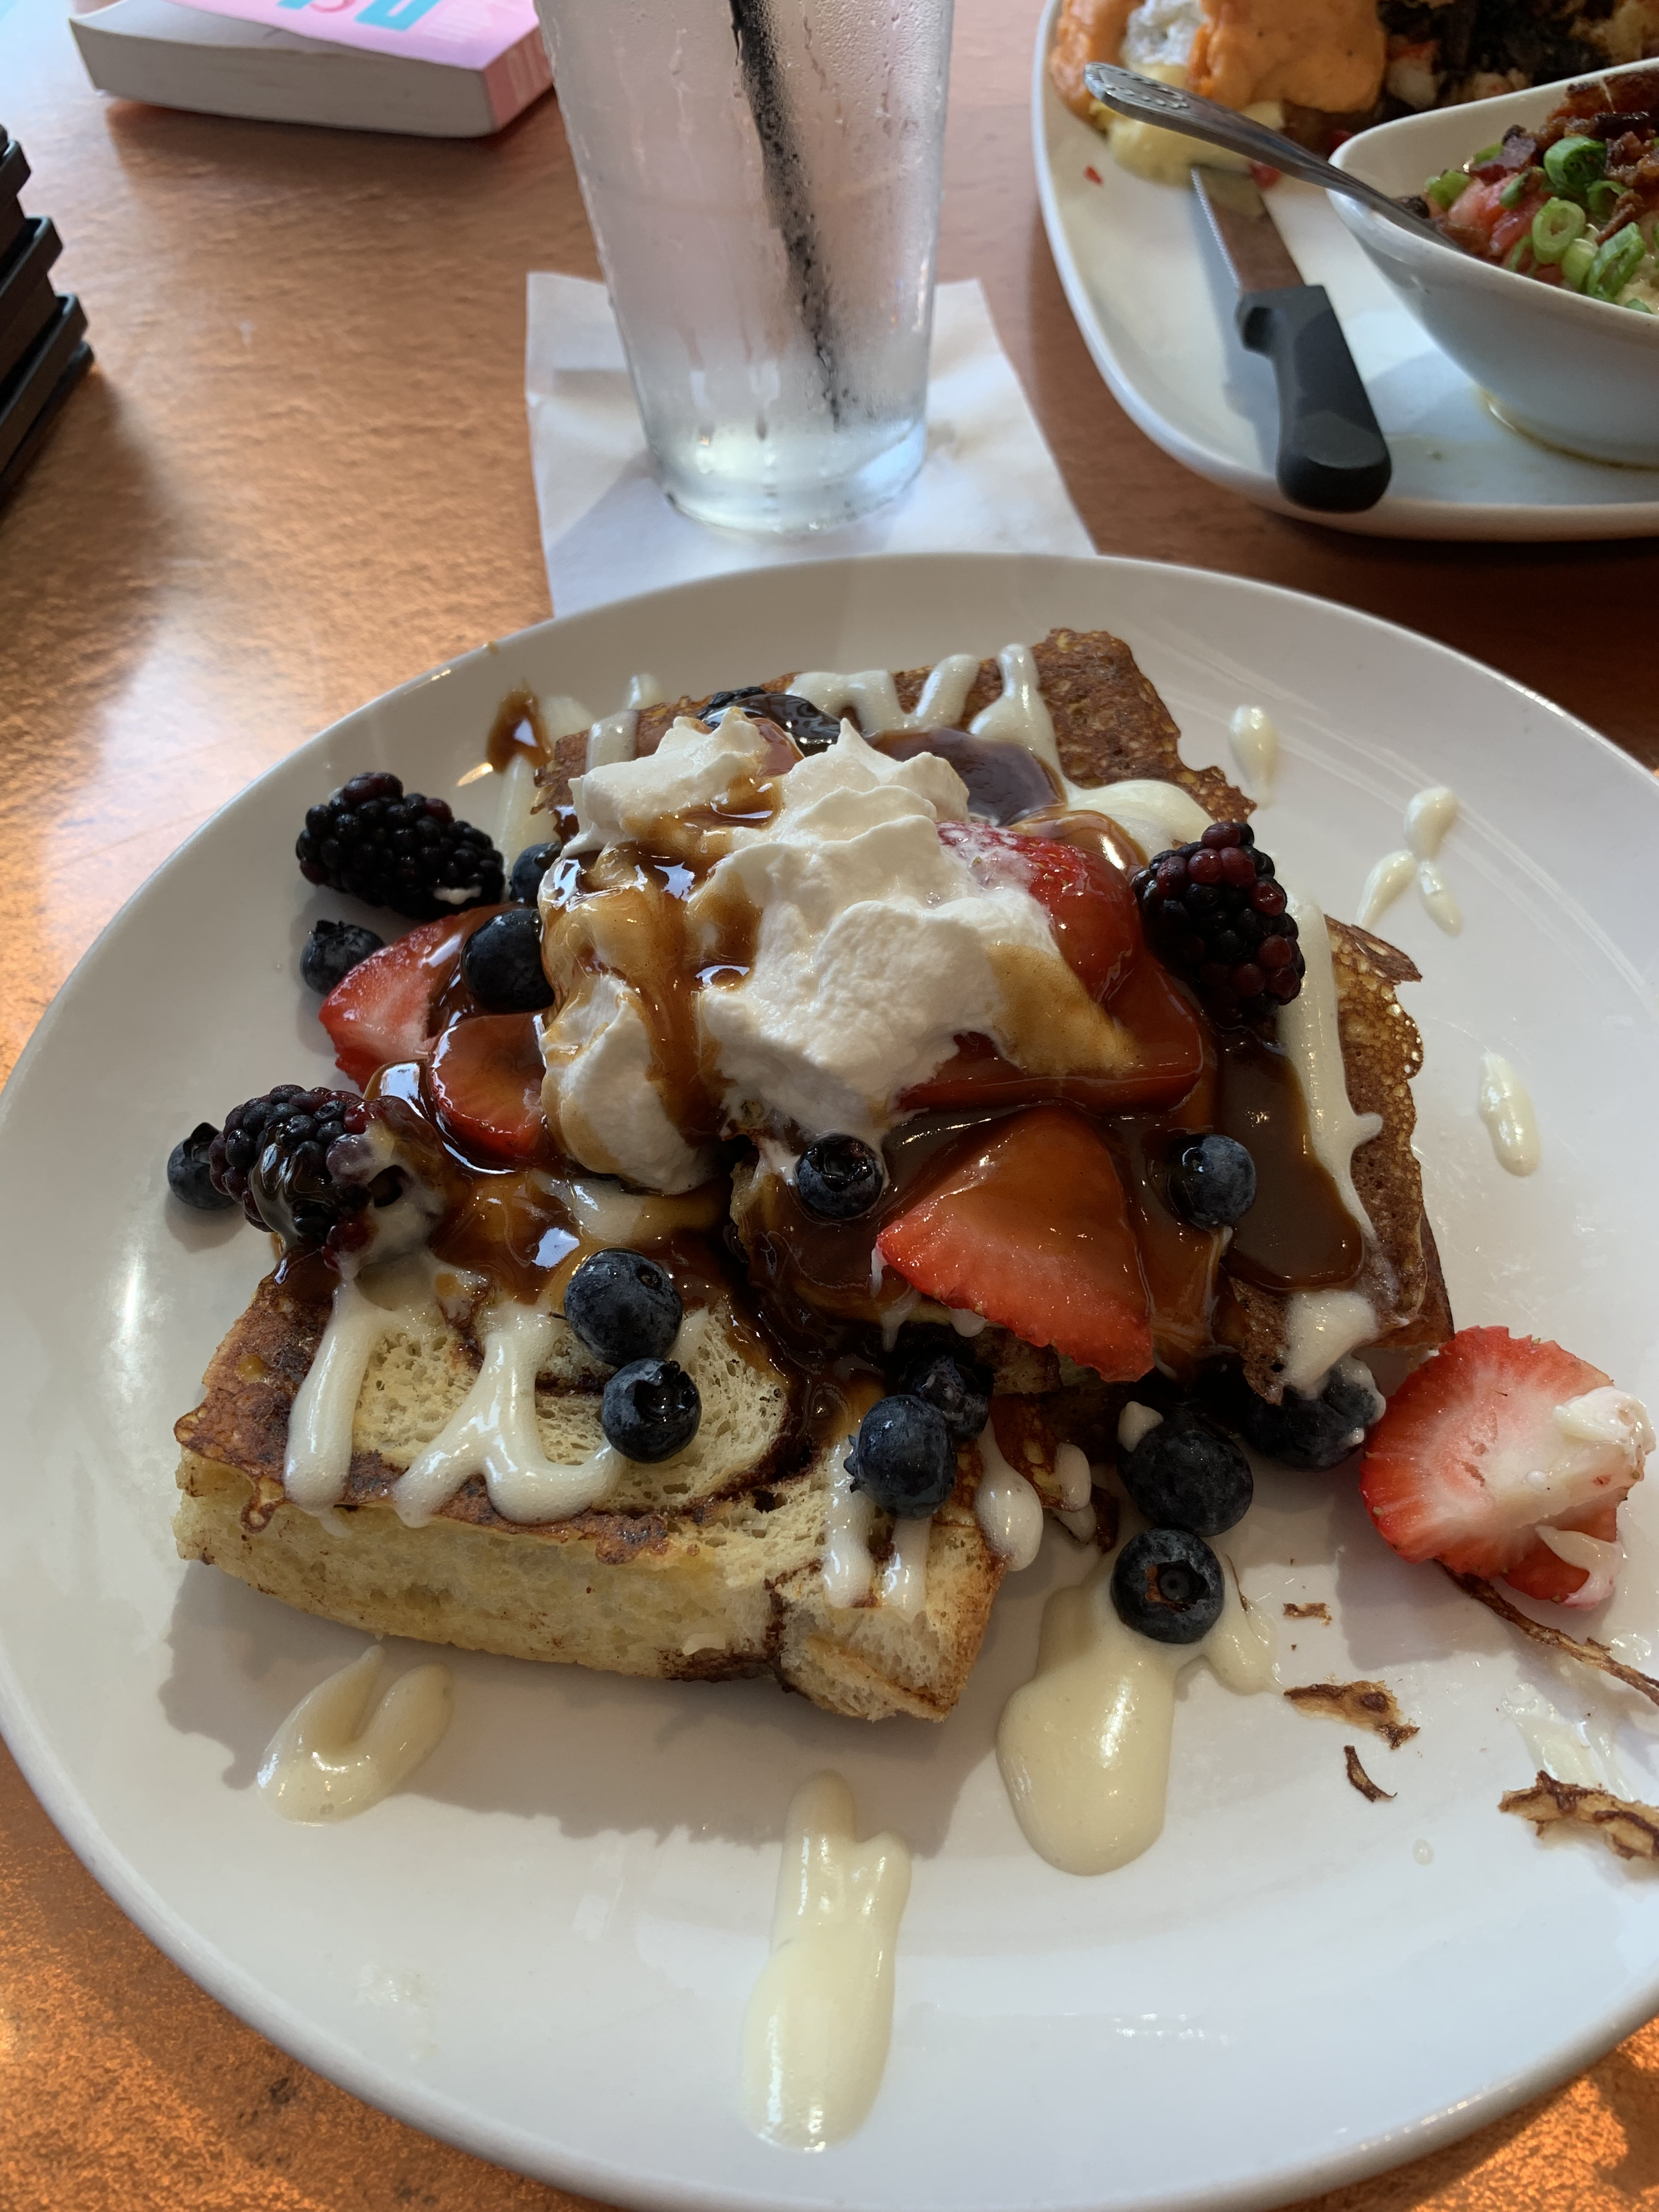 Another Broken Egg Cafe: Cinnamon Roll French Toast and Beignets